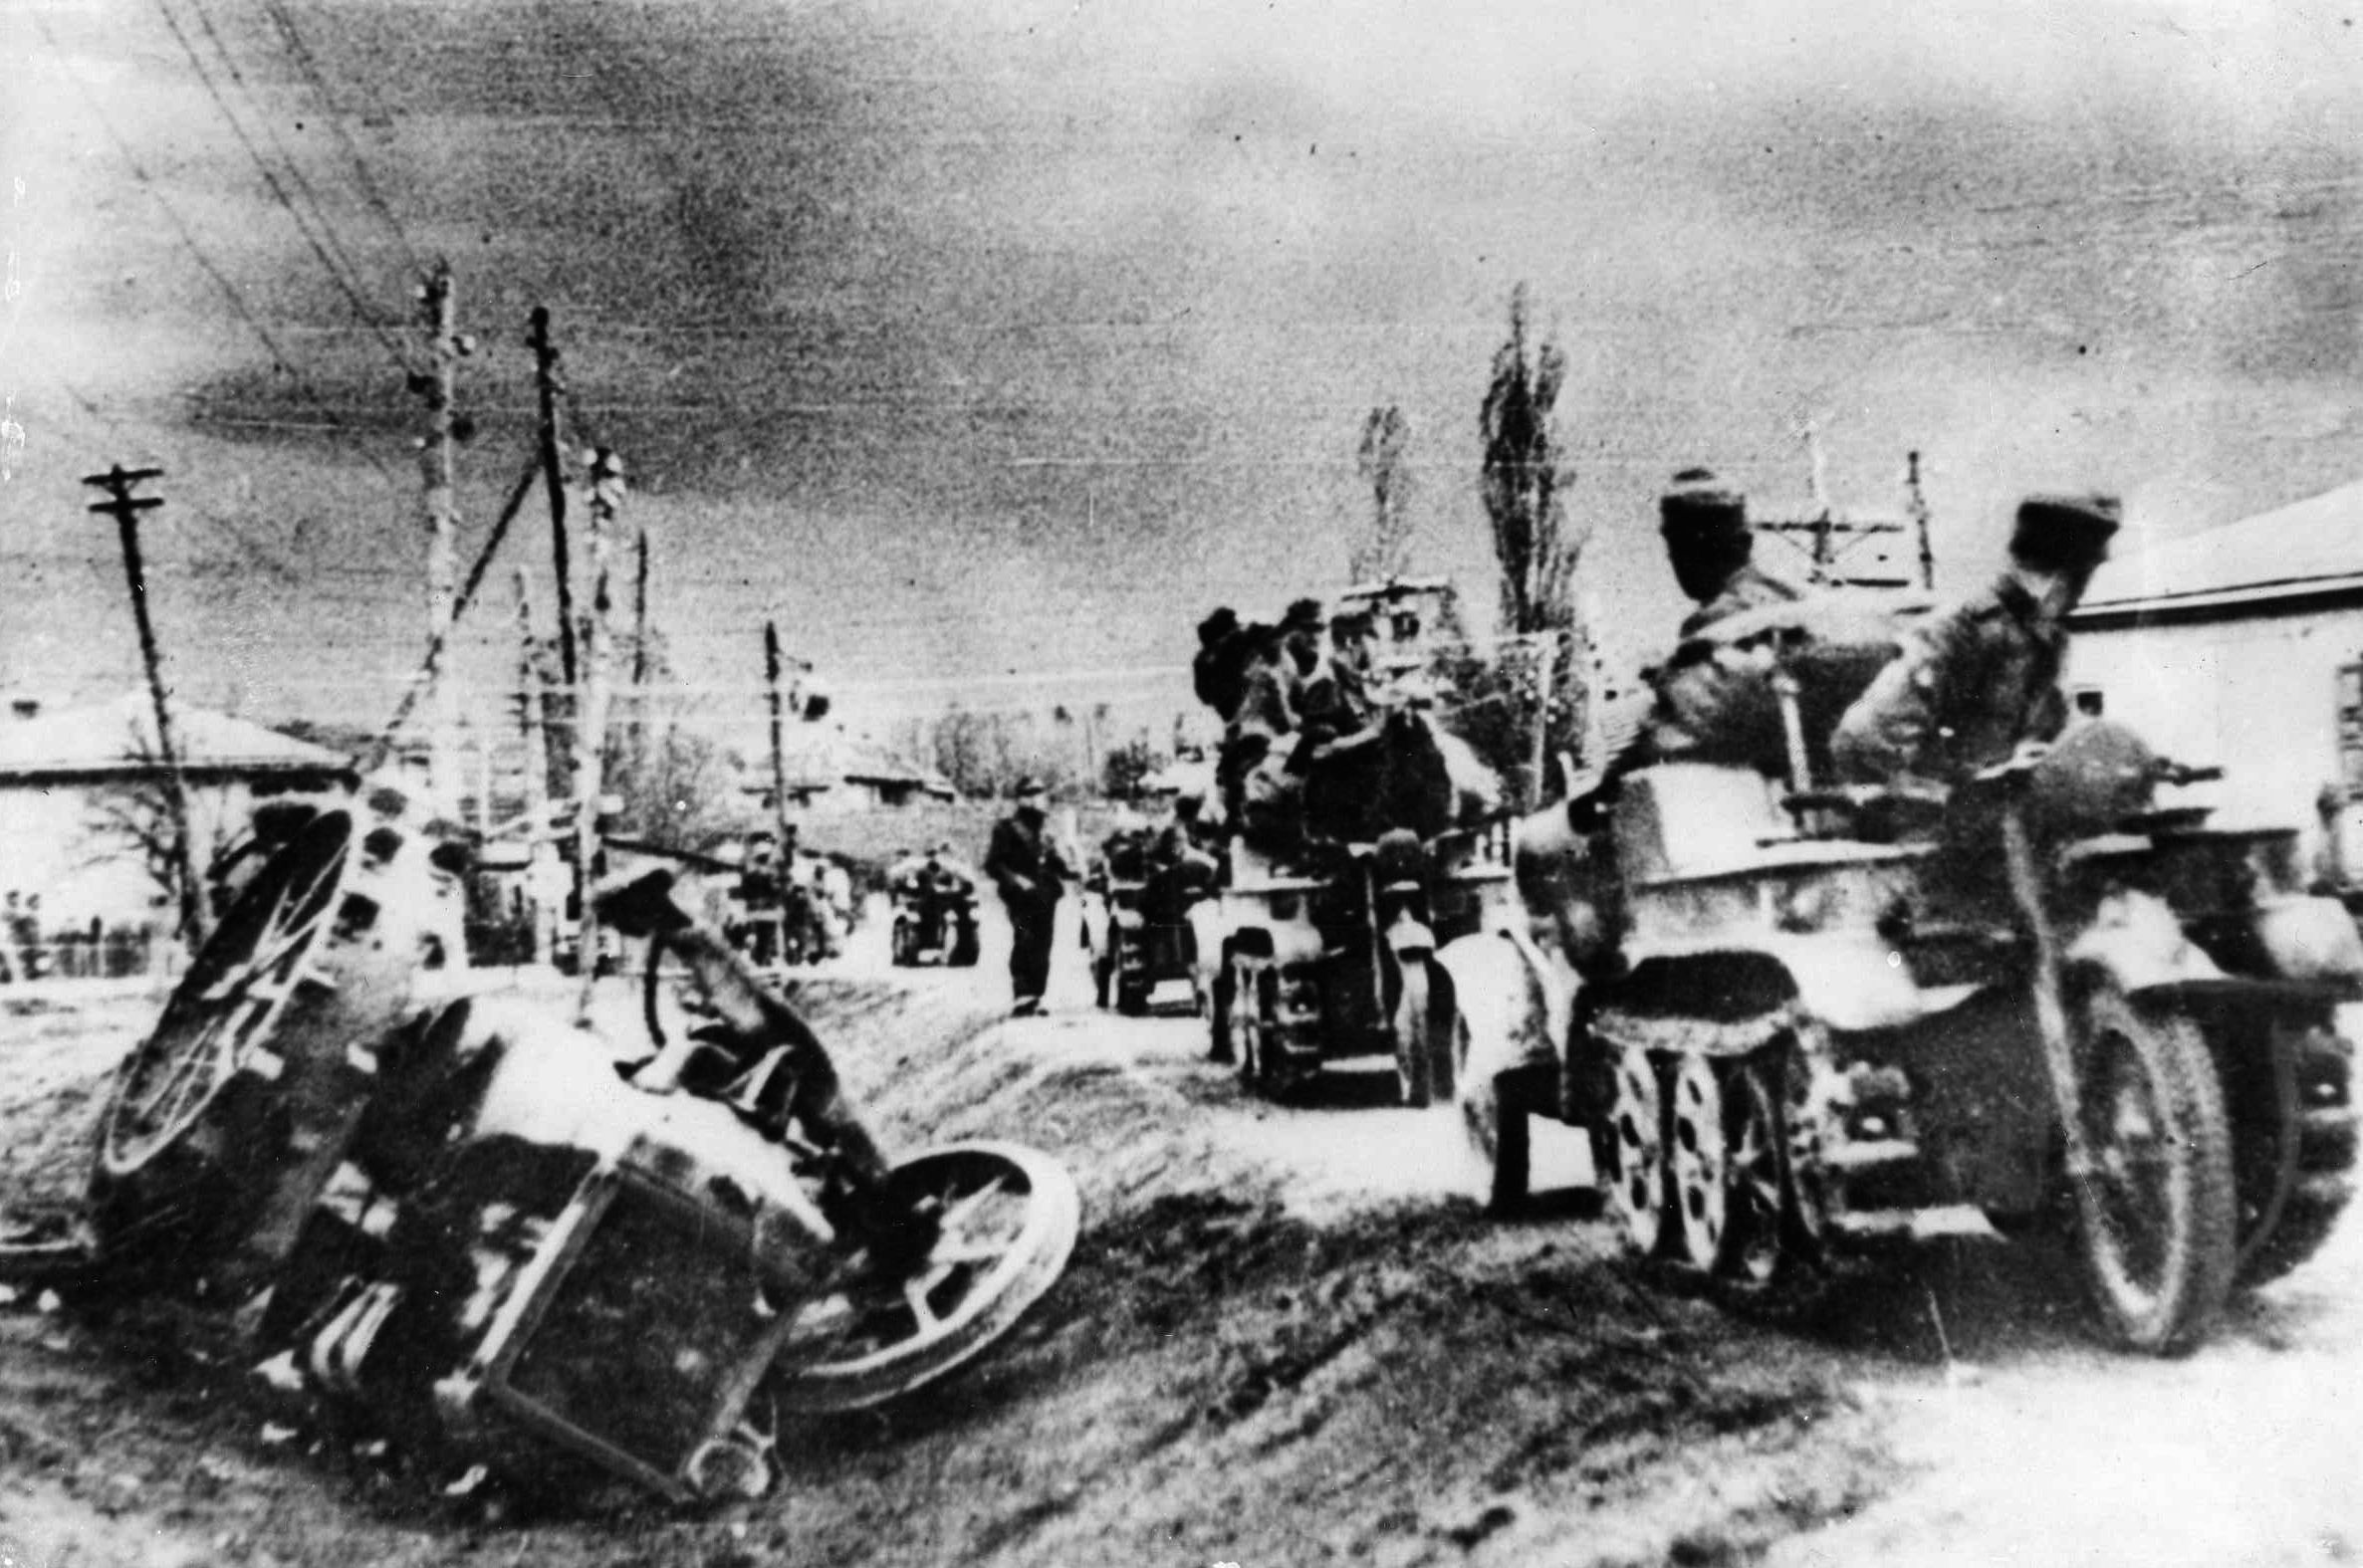 Mounted on kettenkrad caterpillar-powered motorcycles, German soldiers fall back along a dirt road in the Caucasus. After giving up the Taman Peninsula, the Germans attempted to minimize their losses during the retreat. (All photos: National Archives)